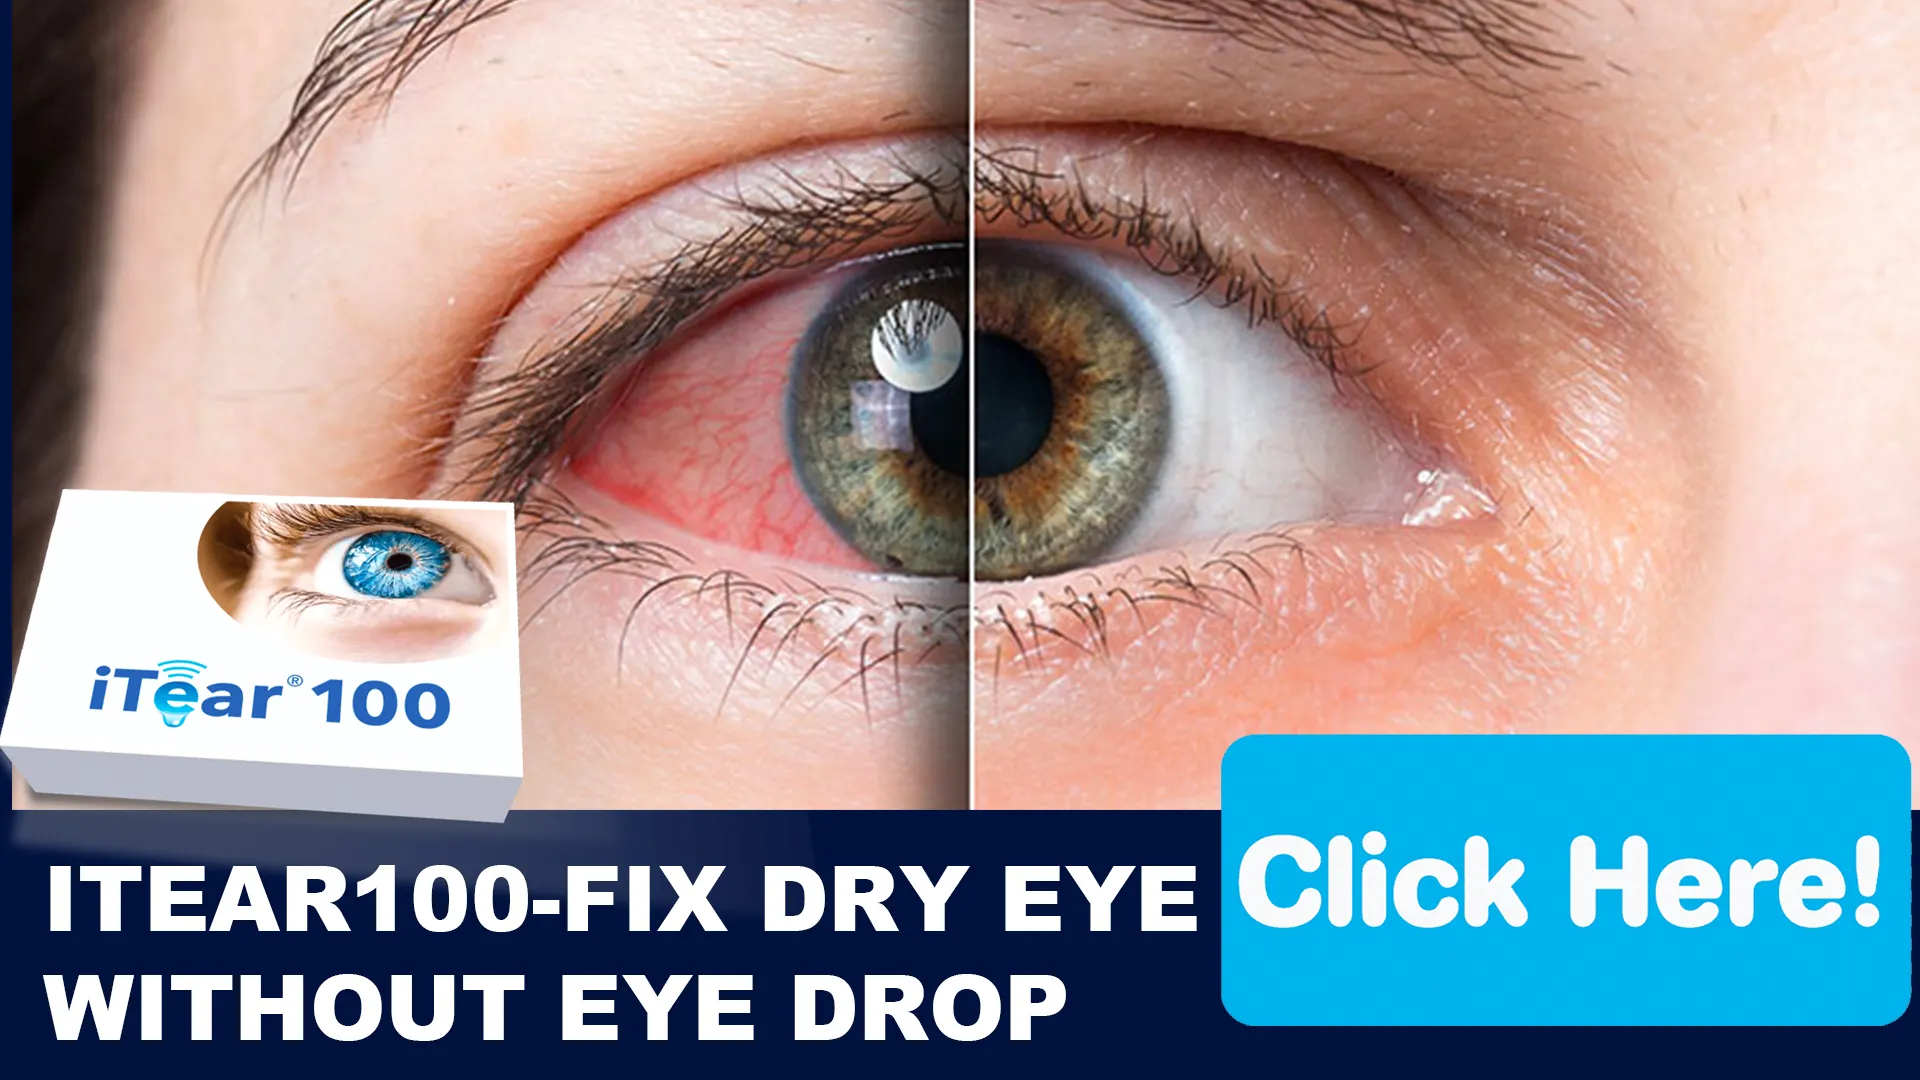  Call Olympic Ophthalmics
 for Holistic Dry Eye Relief 